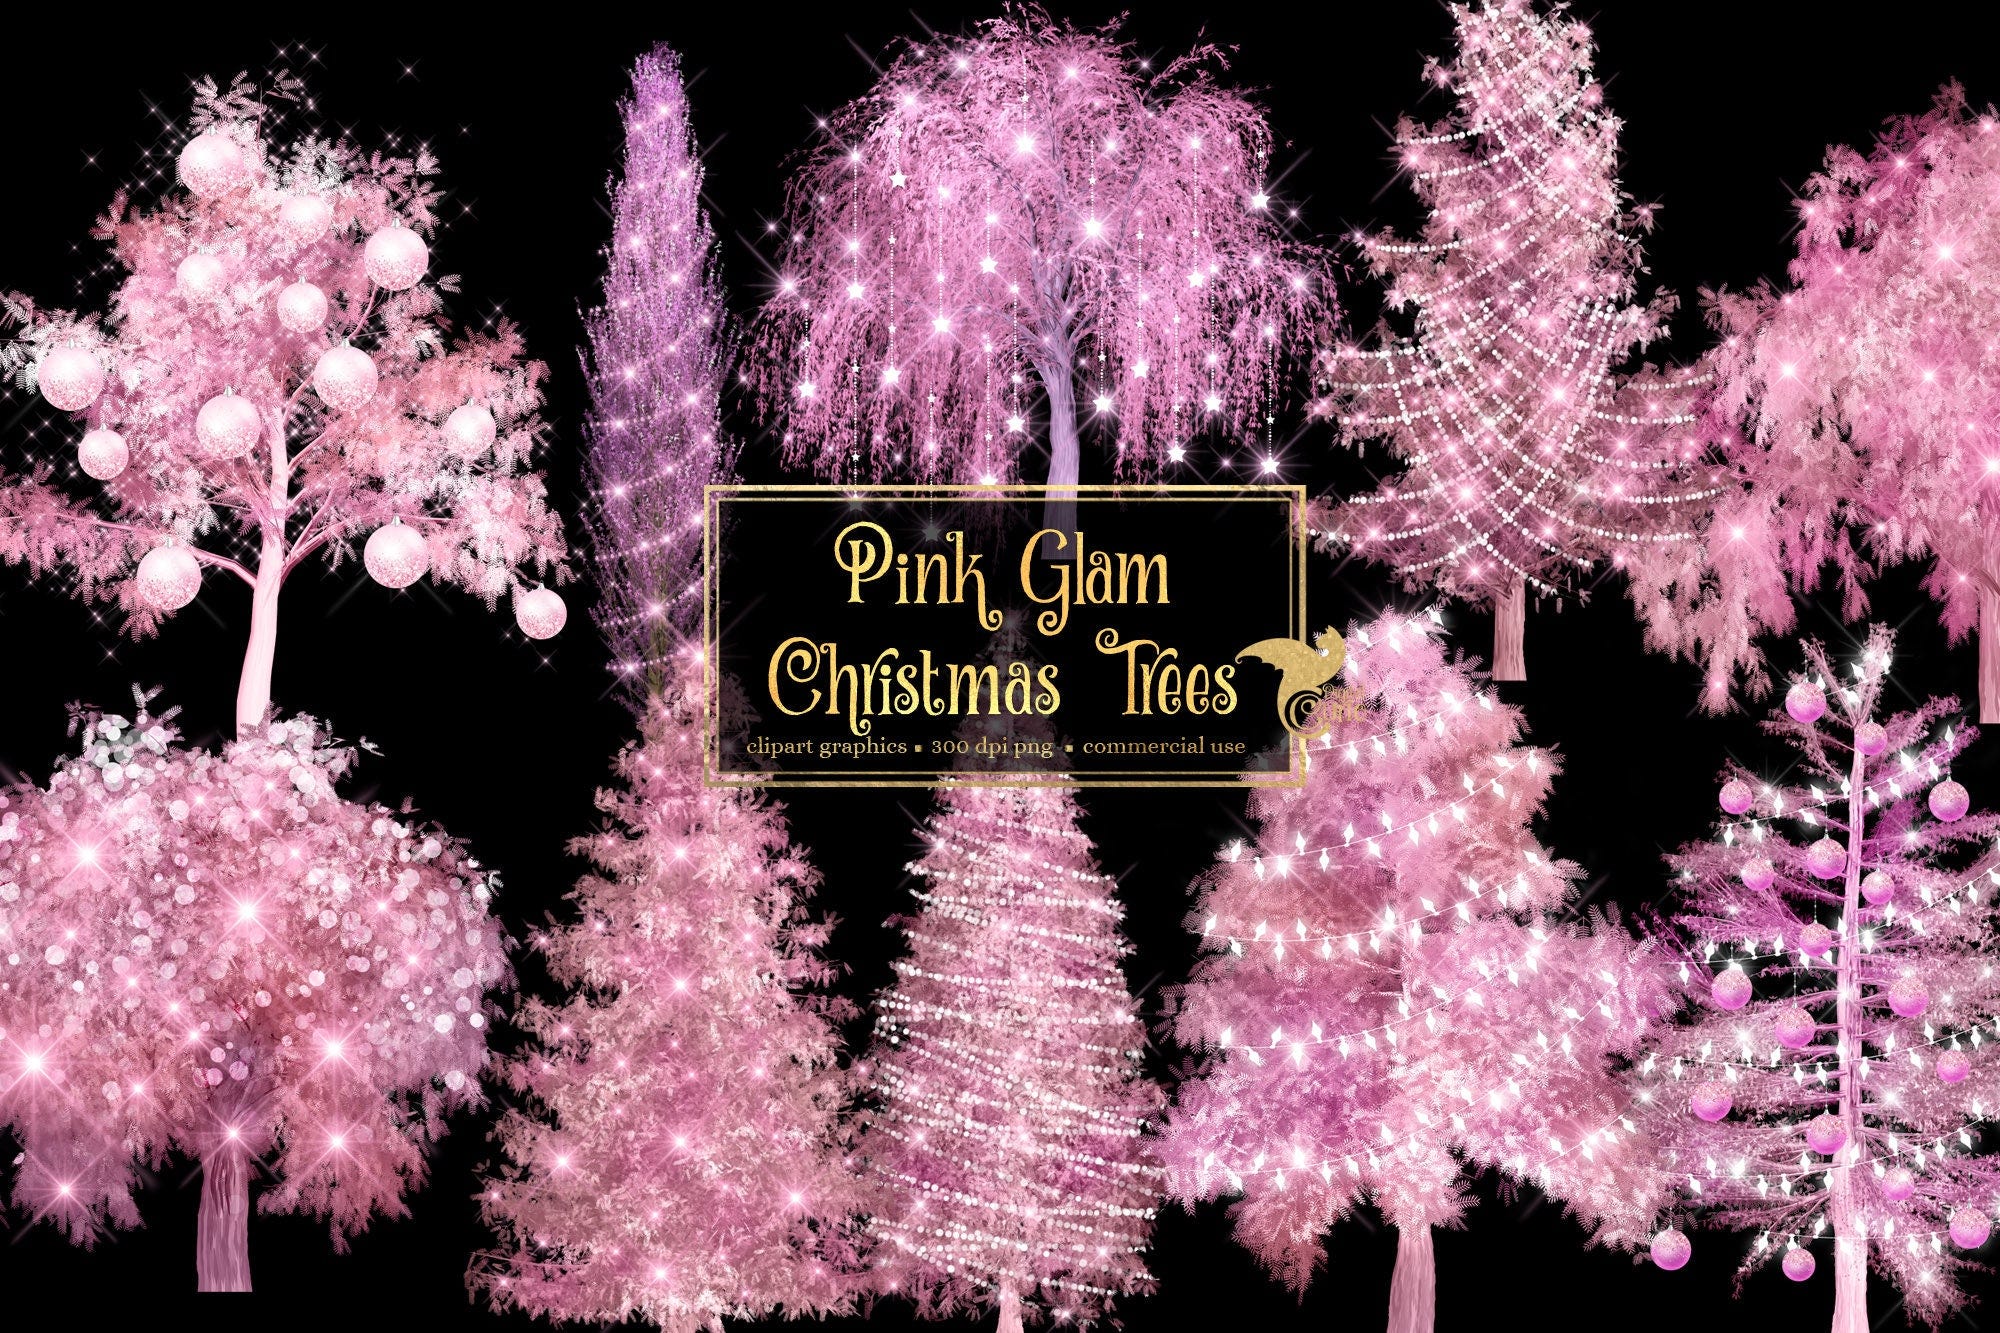 Pink Glam Christmas Trees Clip Art - digital holiday lighted tree clipart in png format instant download for commercial use